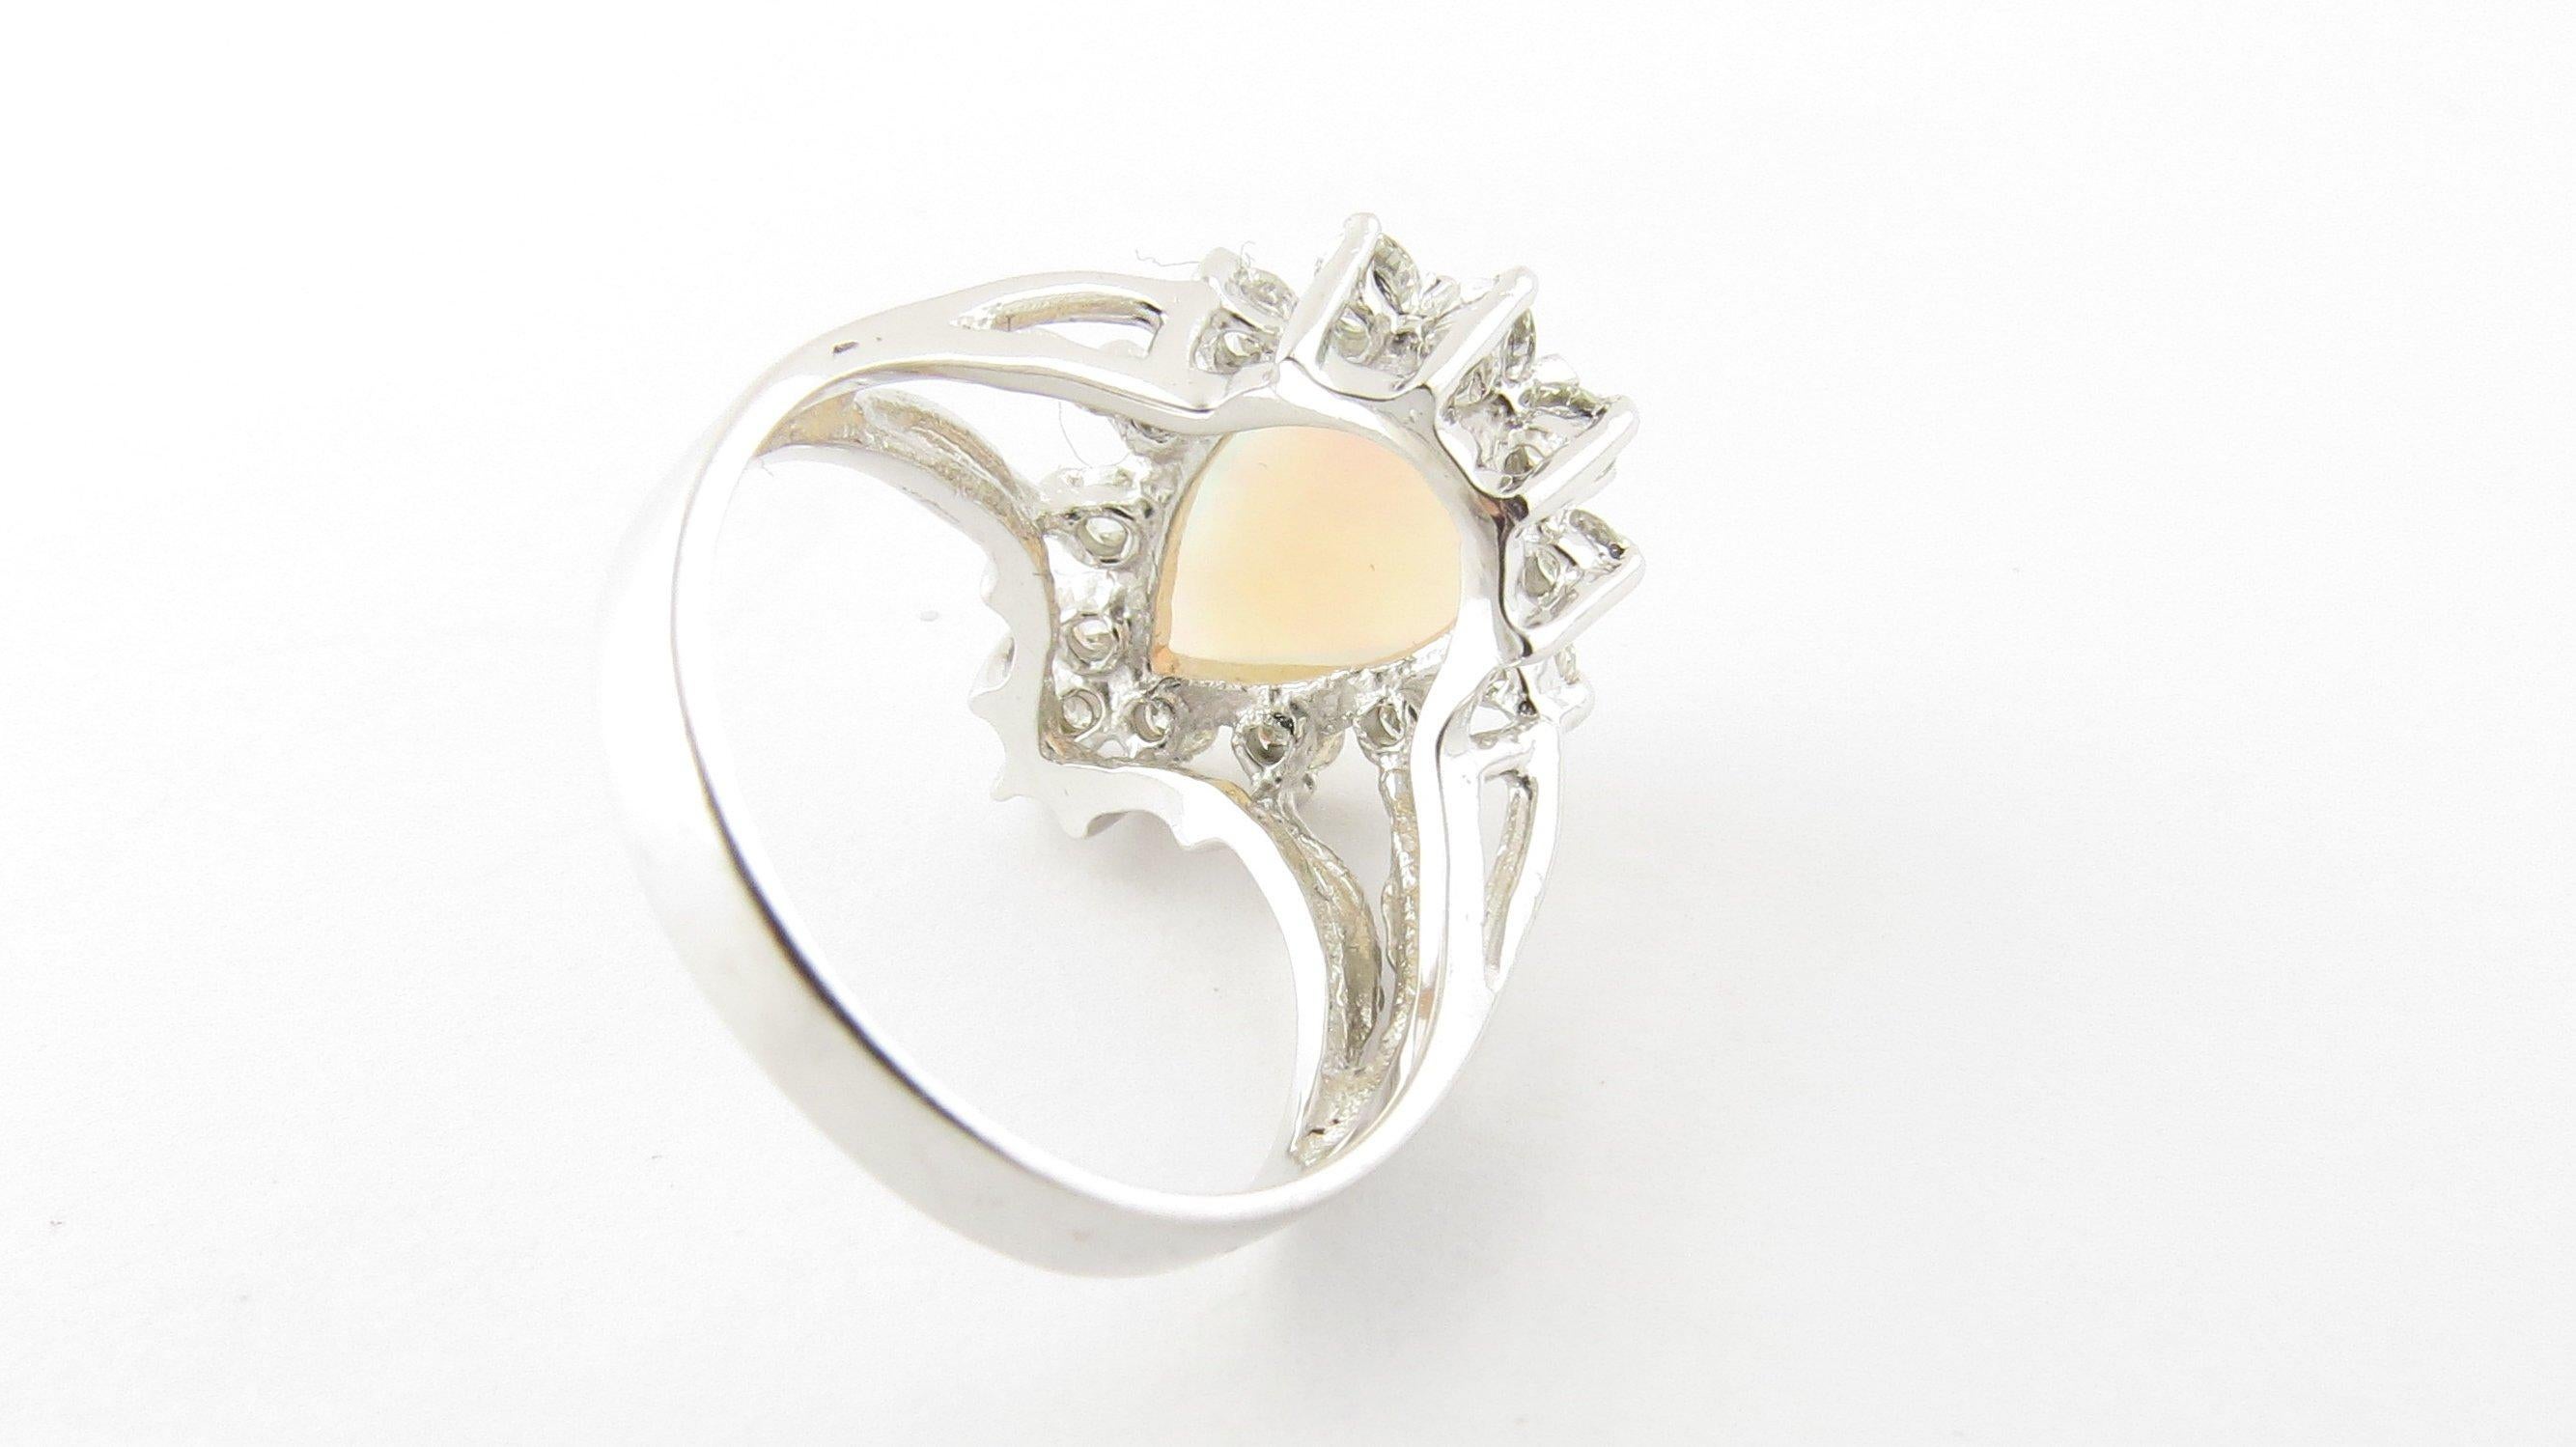 Vintage 14 Karat White Gold Opal and Diamond Ring Size 5.25- This stunning ring features one pear-shaped opal (14 mm x 10 mm) surrounded by 13 round brilliant cut diamonds and set in classic 14K white gold. Top of ring measures 17 mm x 13 mm. Shank